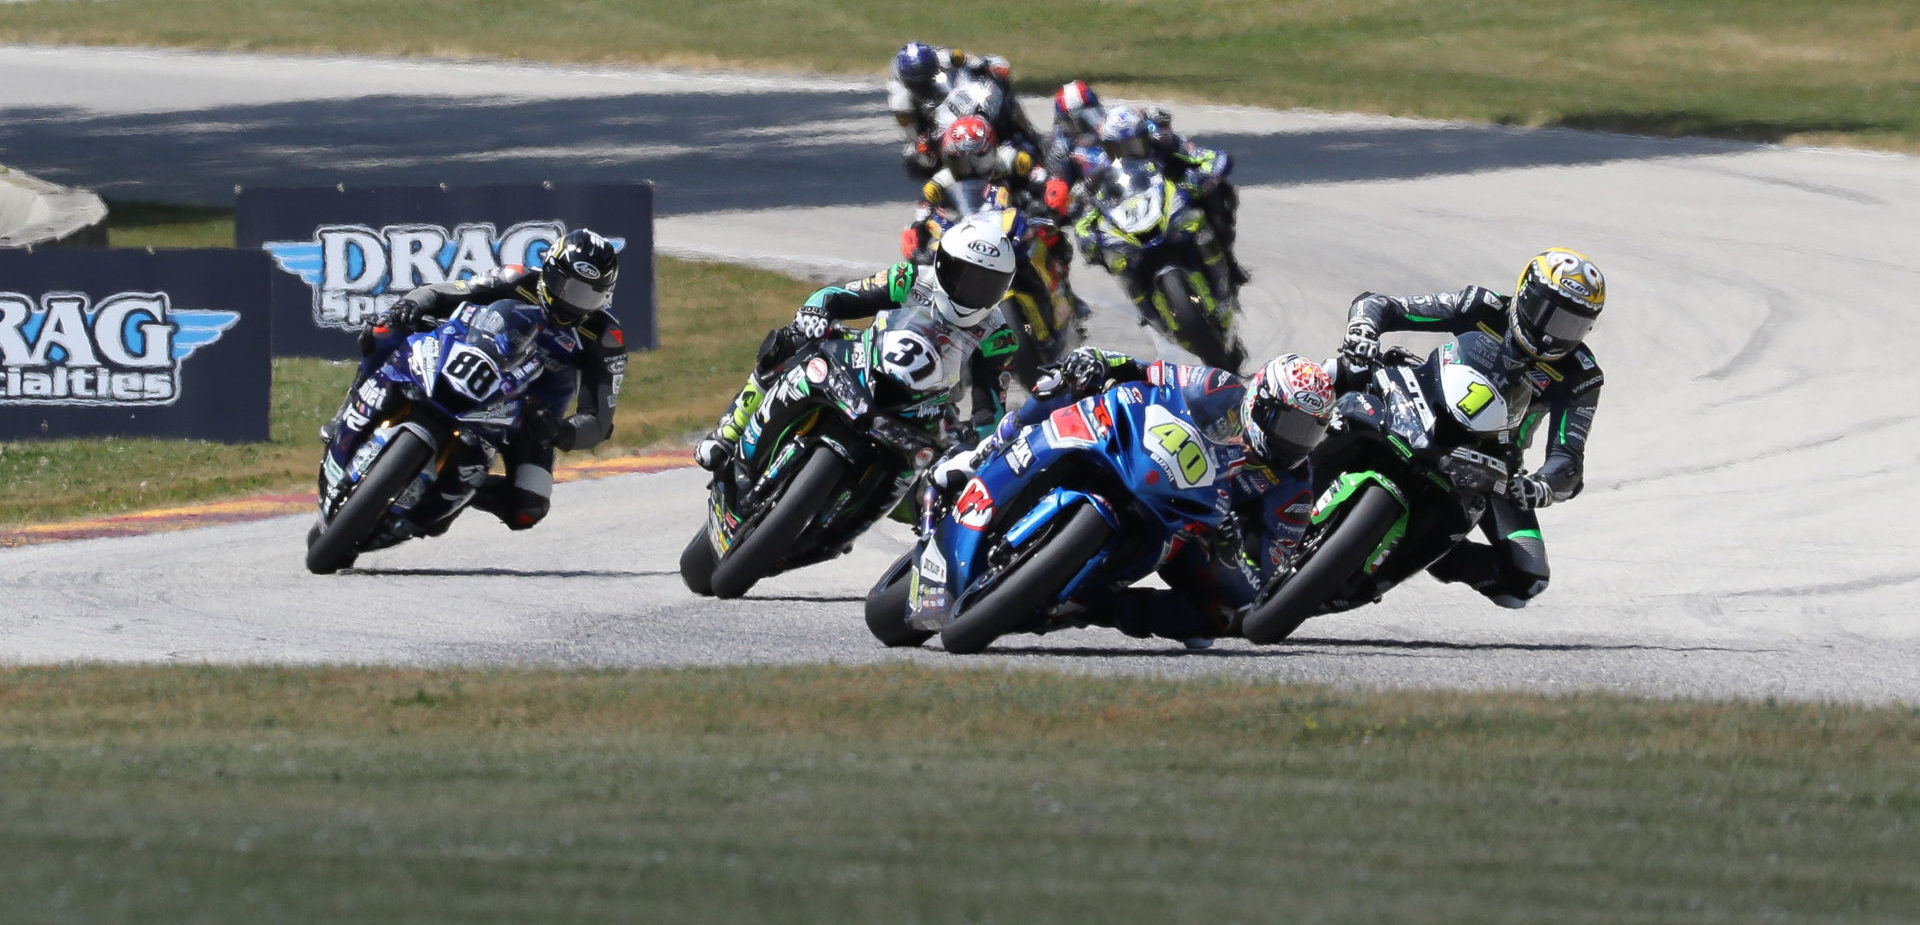 The MotoAmerica Supersport class has featured very close racing, as seen here at Road America in 2021 when Sean Dylan Kelly (40), Richie Escalante (1), Stefano Mesa (37), and Benjamin Smith (88) contested the lead. Photo by Brian J. Nelson.